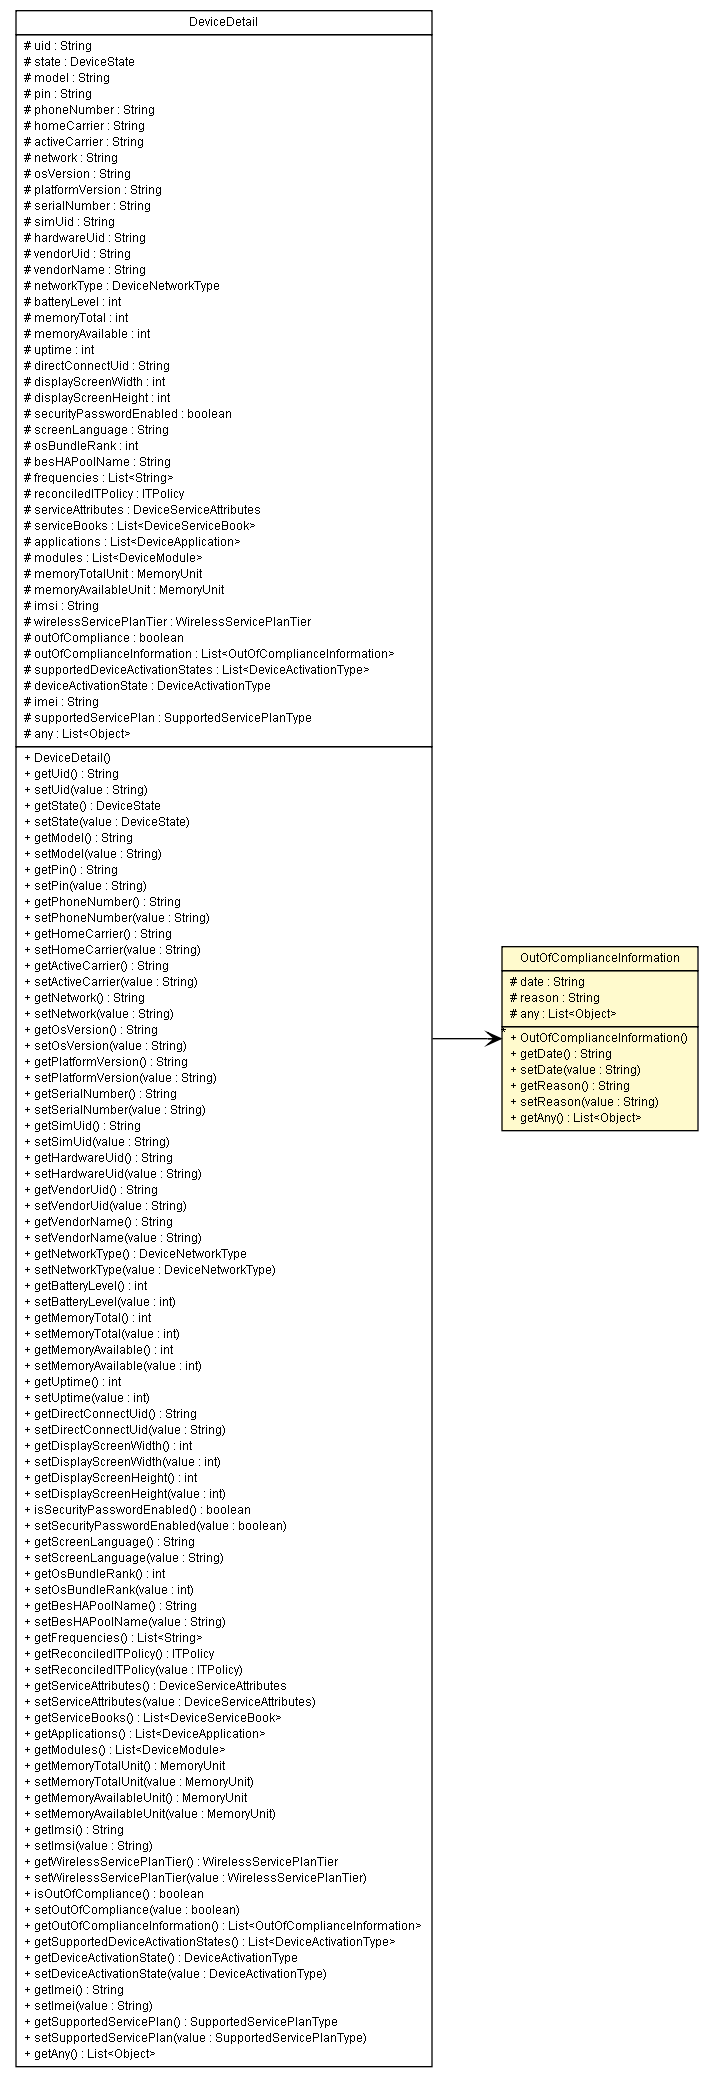 Package class diagram package OutOfComplianceInformation